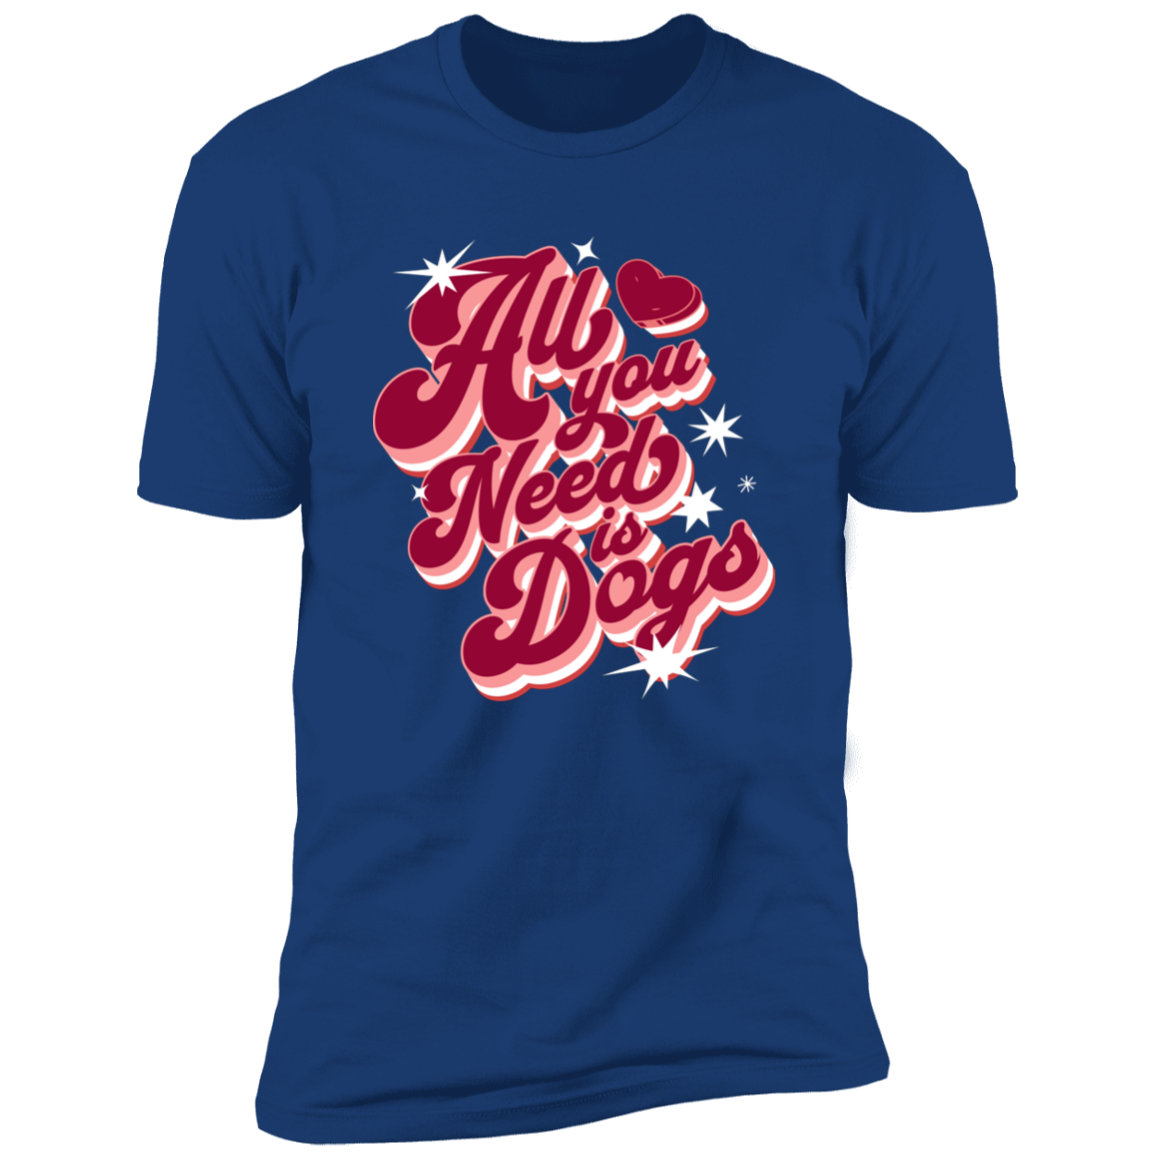 All I Need is Dogs T-shirt, Dog Shirt for humans, in royal blue